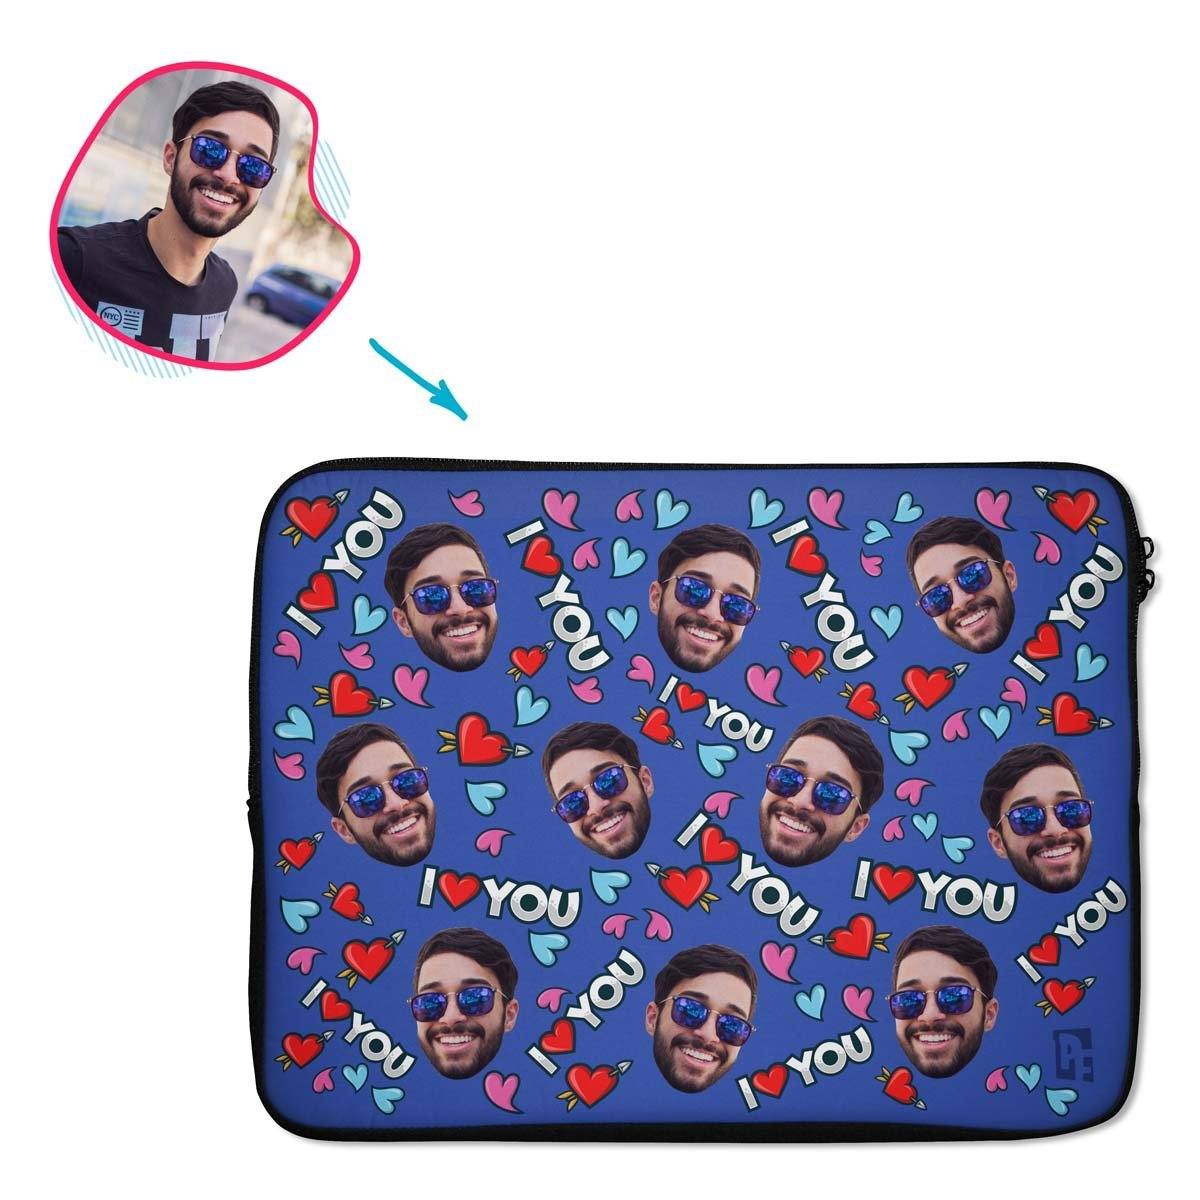 darkblue Love You laptop sleeve personalized with photo of face printed on them